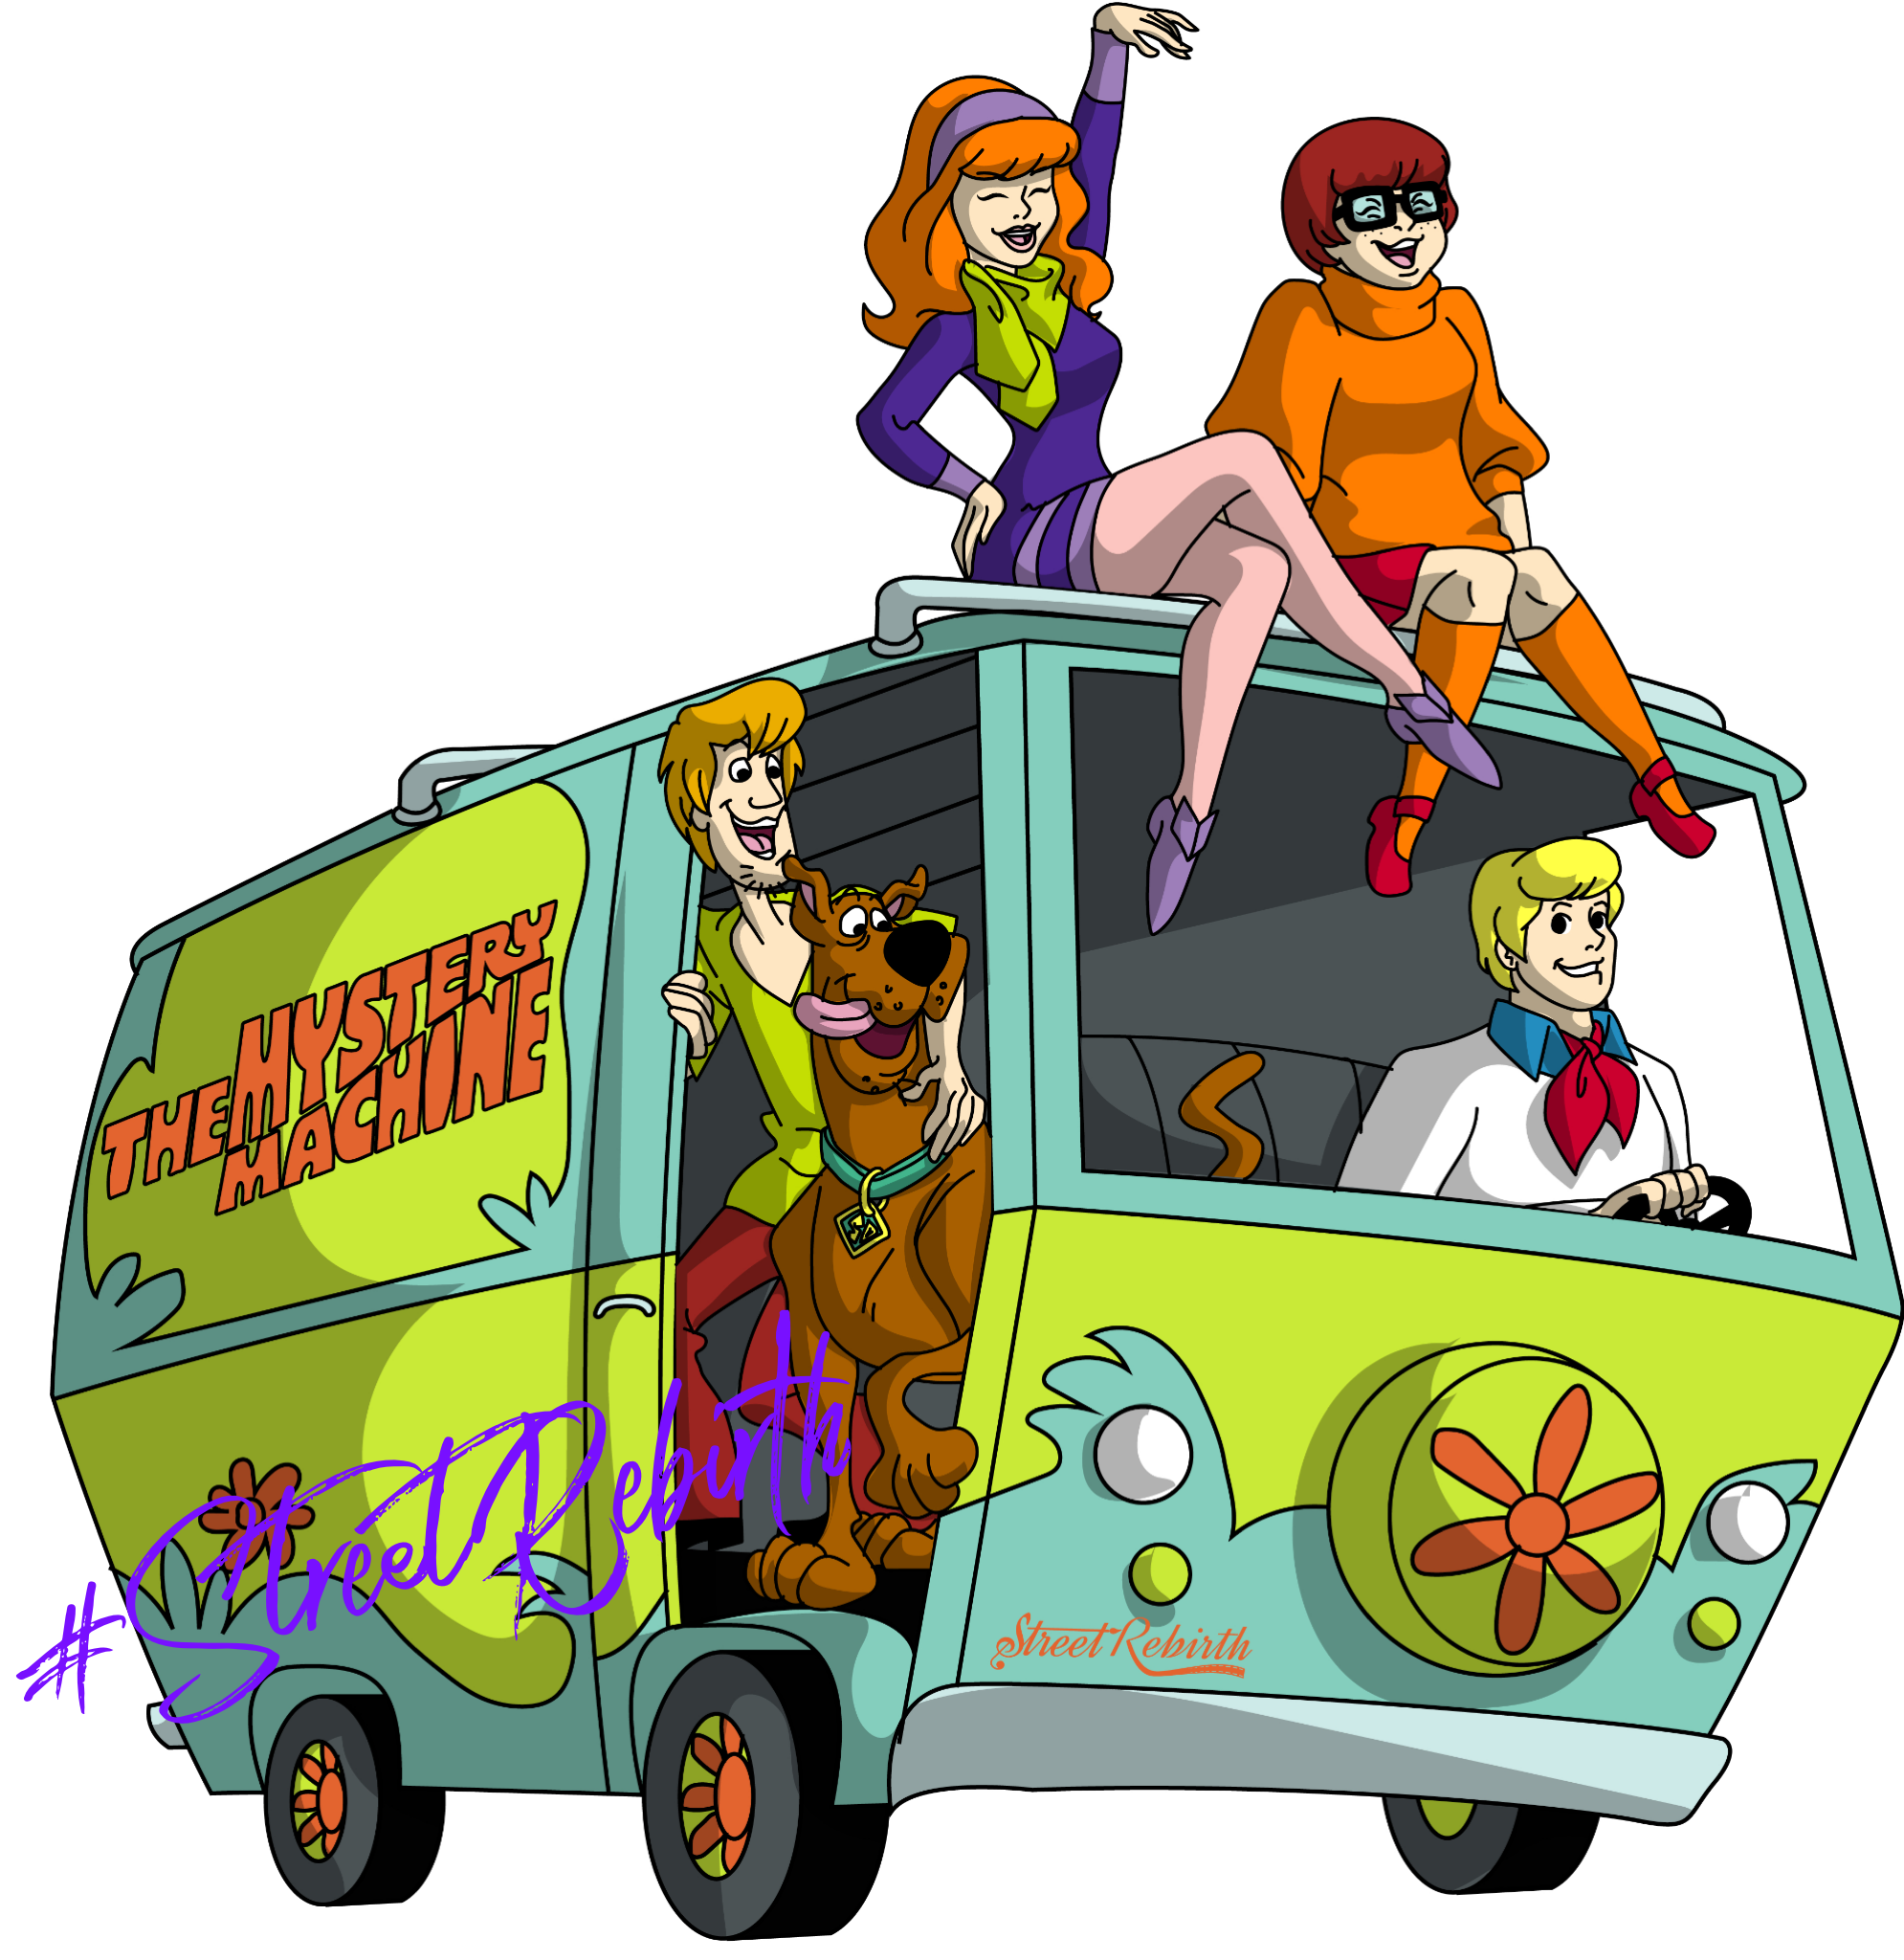 Scooby Doo Gang Sticker – One 4 Inch Water Proof Vinyl Sticker – For Hydro Flask, Skateboard, Laptop, Planner, Car, Collecting, Gifting